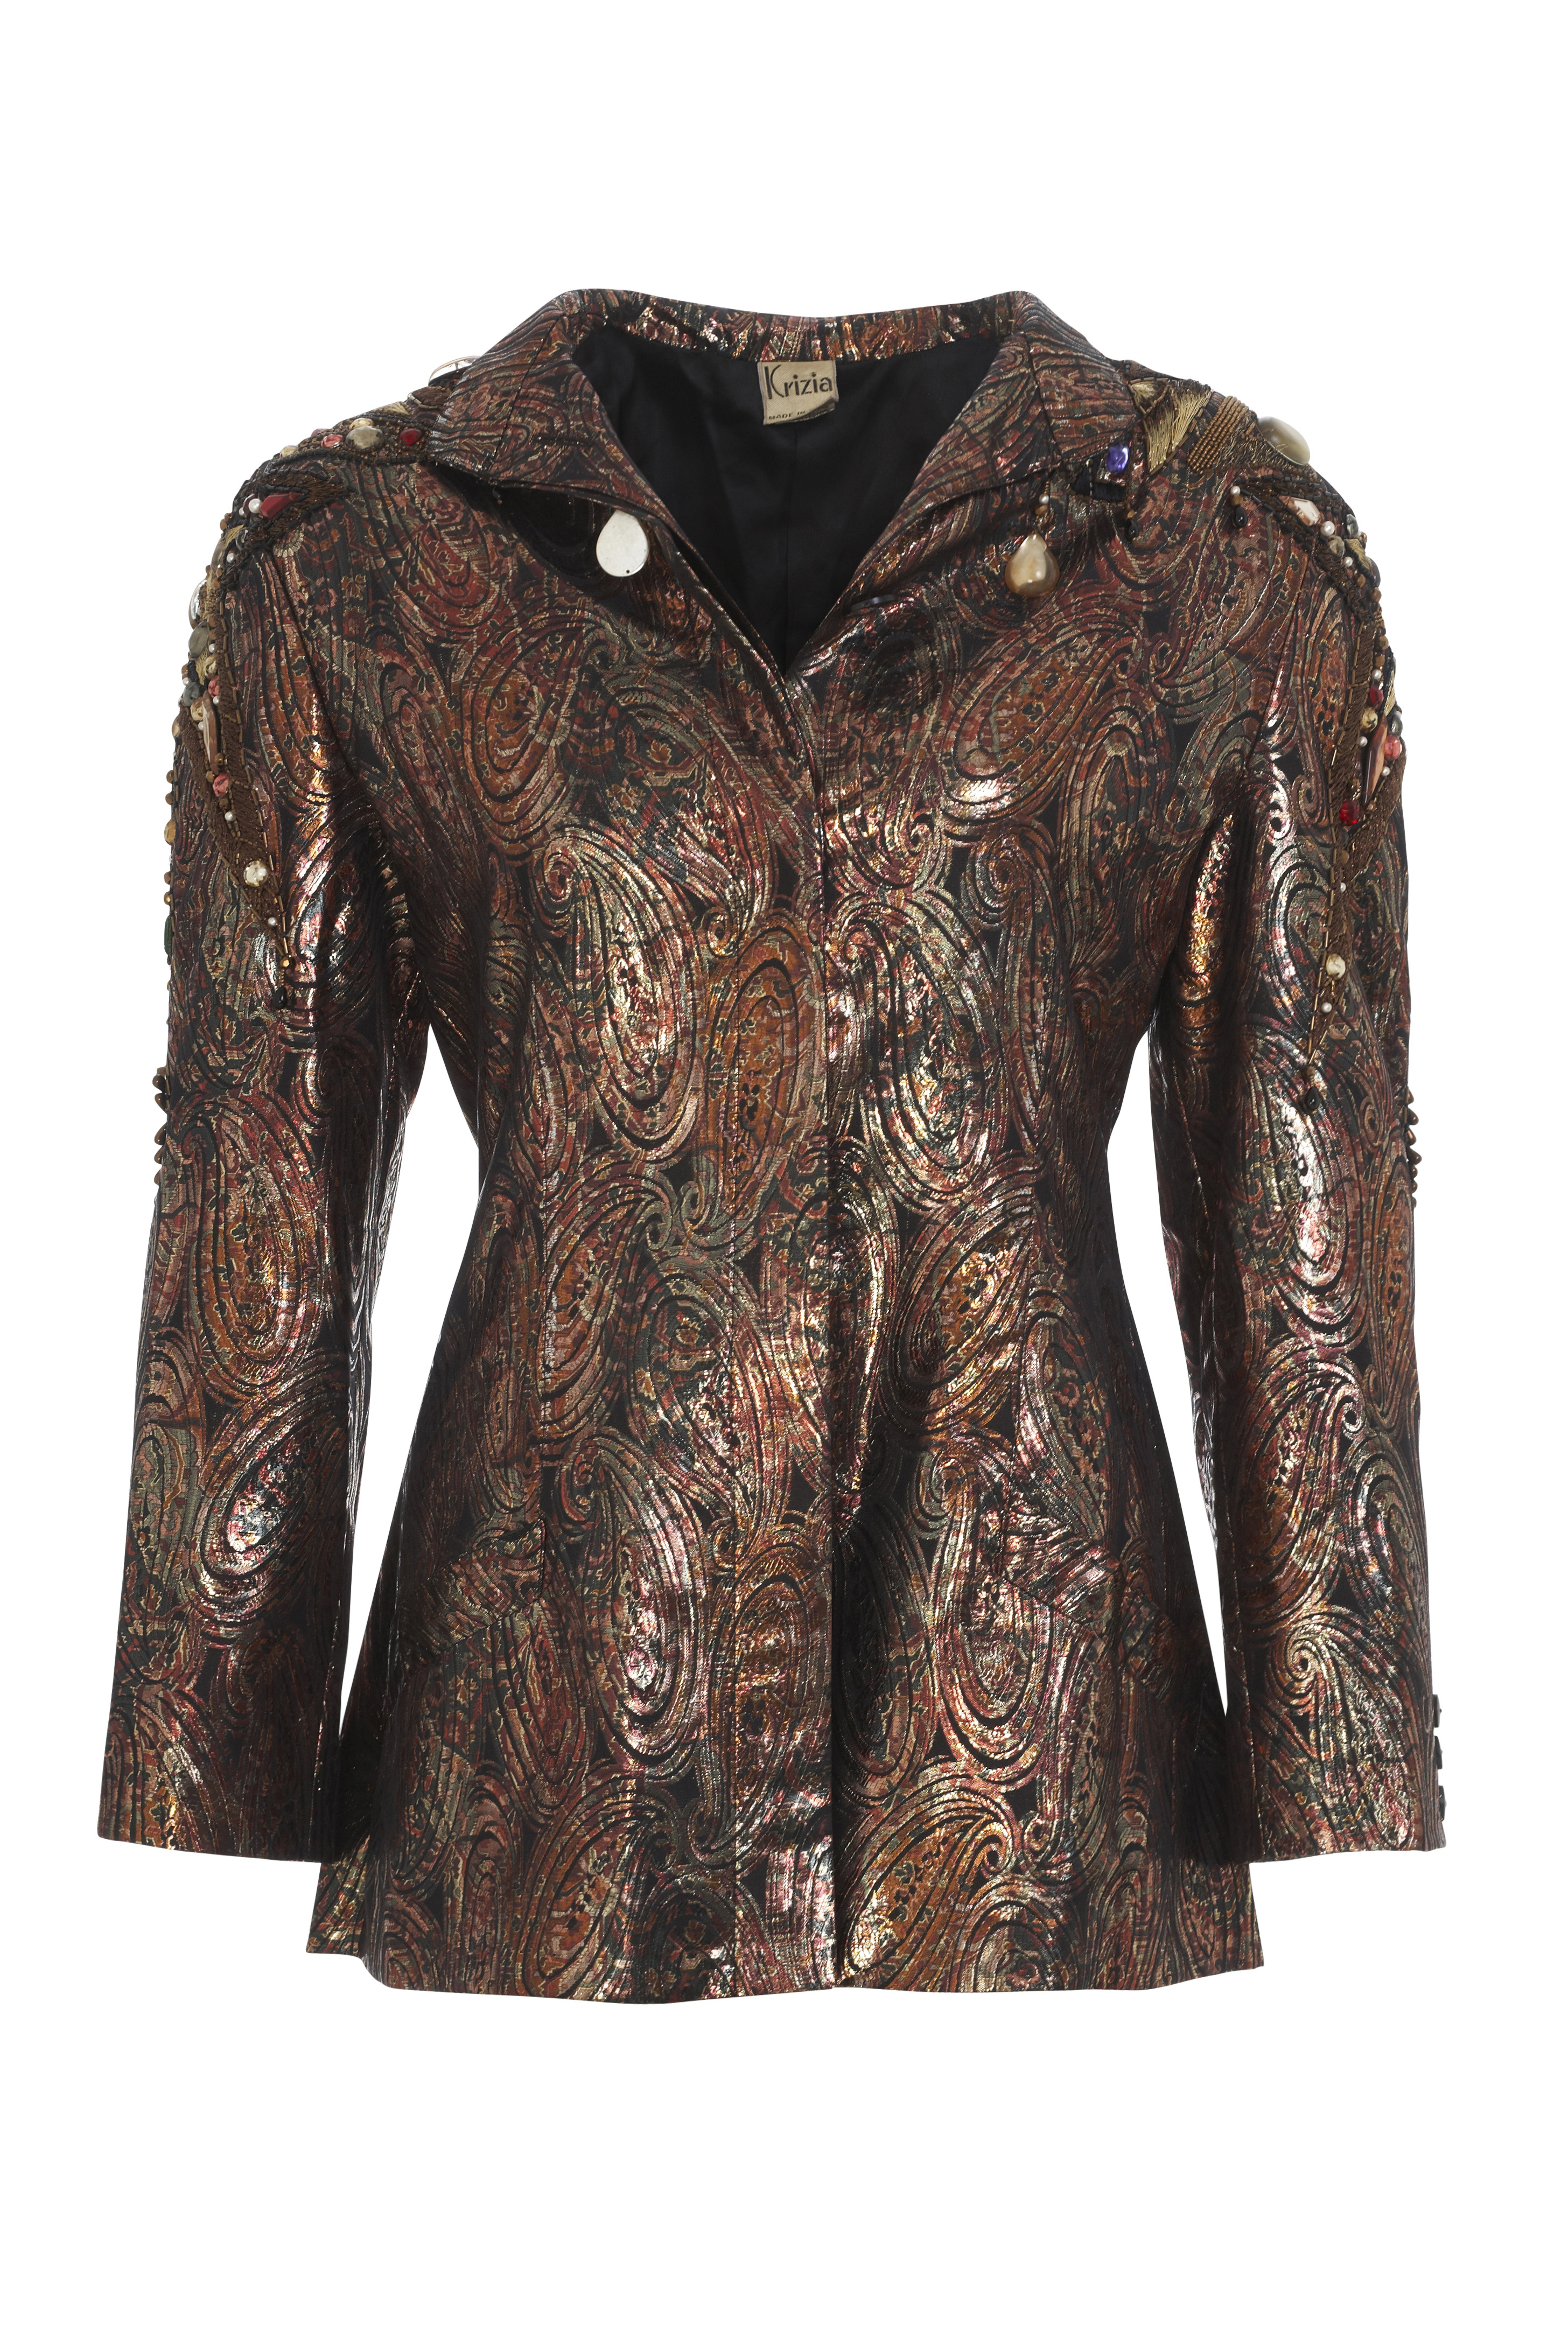 Krizia 1980's bejeweled bronze paisley jacket | Curate8